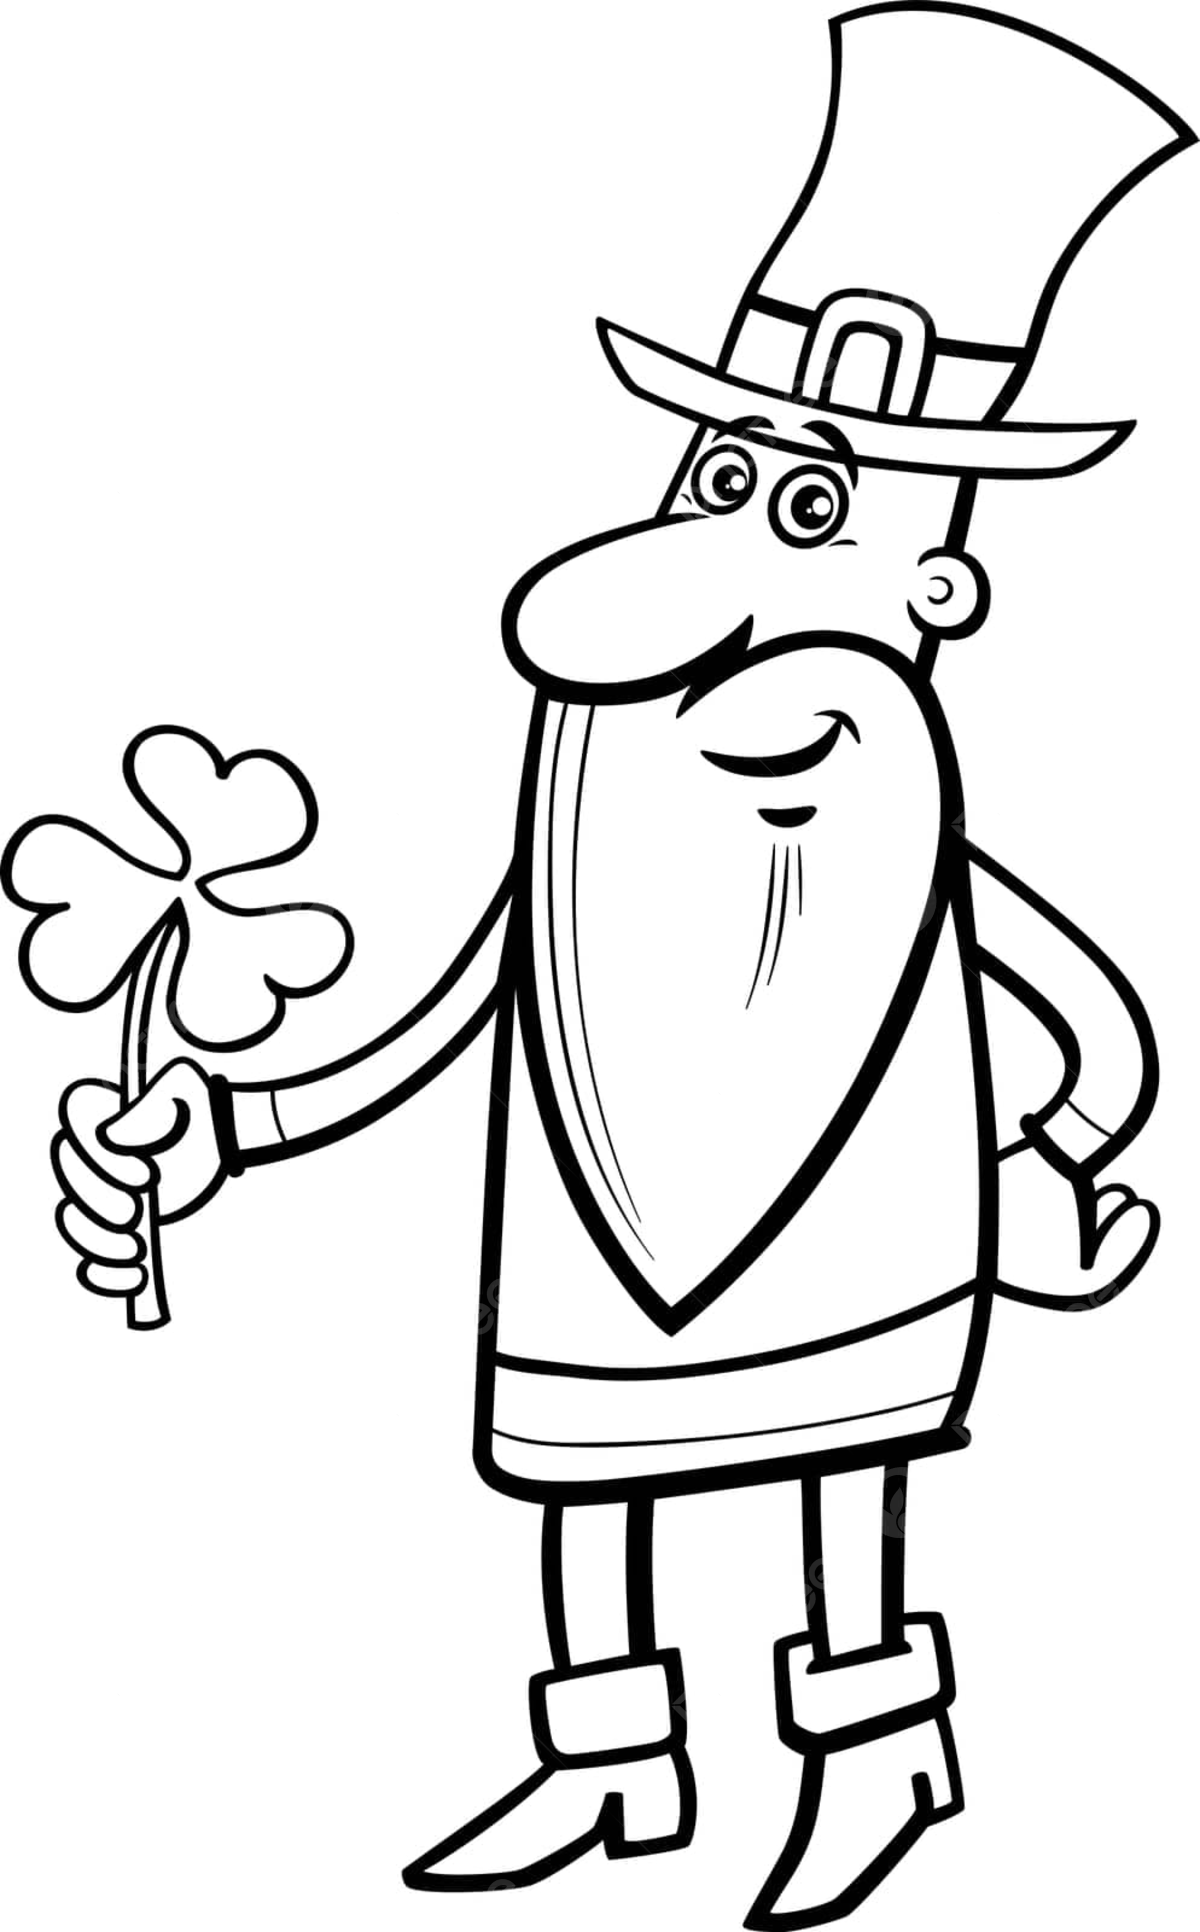 St patricks day printable coloring page of a cartoon leprechaun holding a clover vector man graphic clover png and vector with transparent background for free download